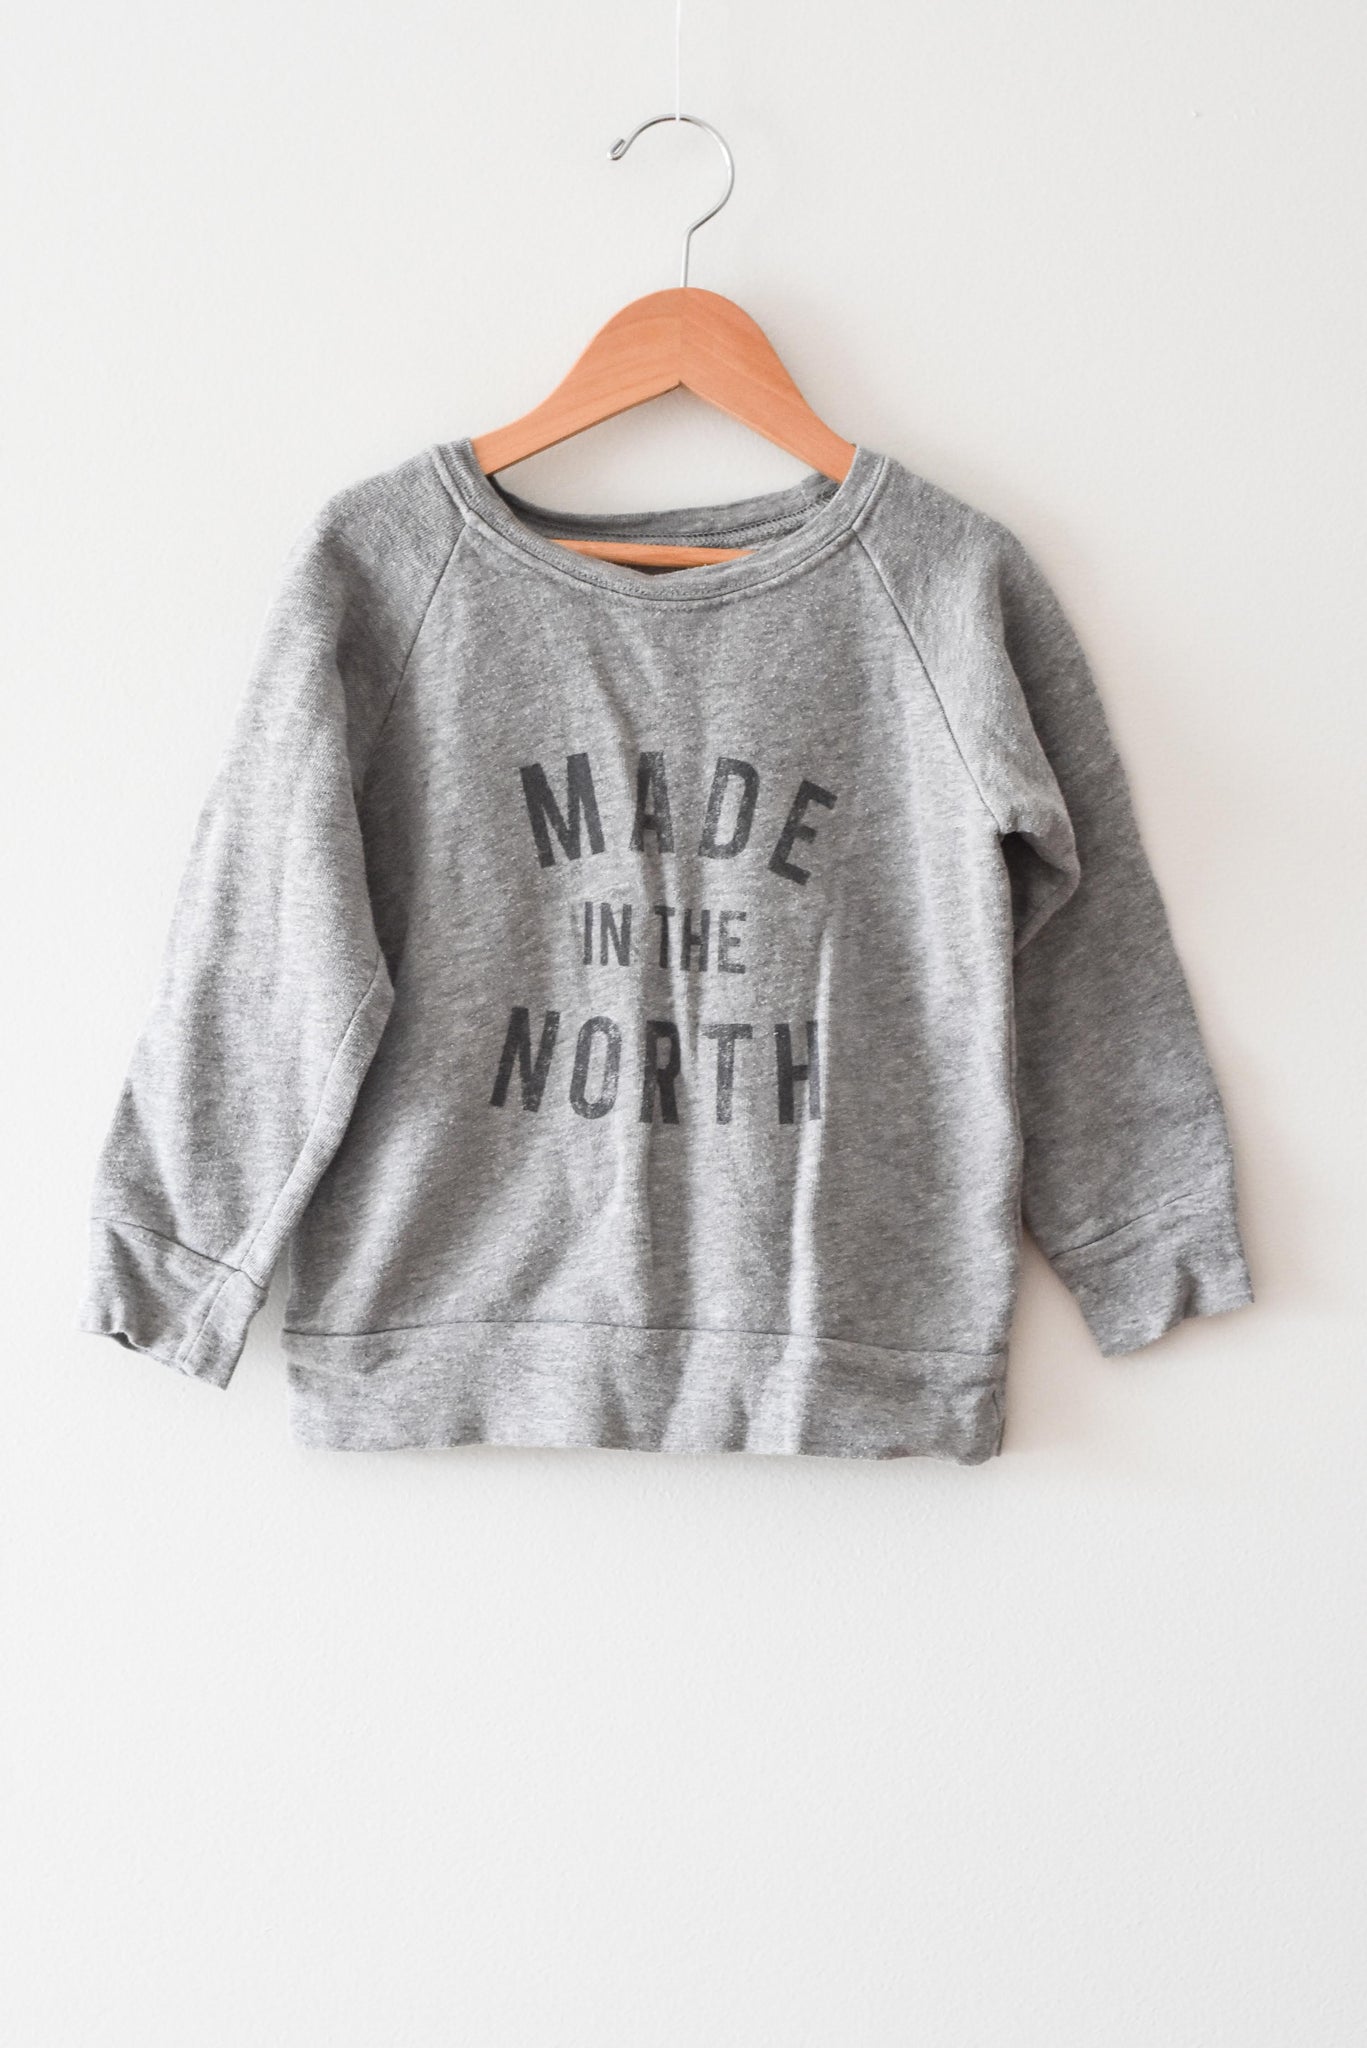 Made in the North Crewneck • 4 years